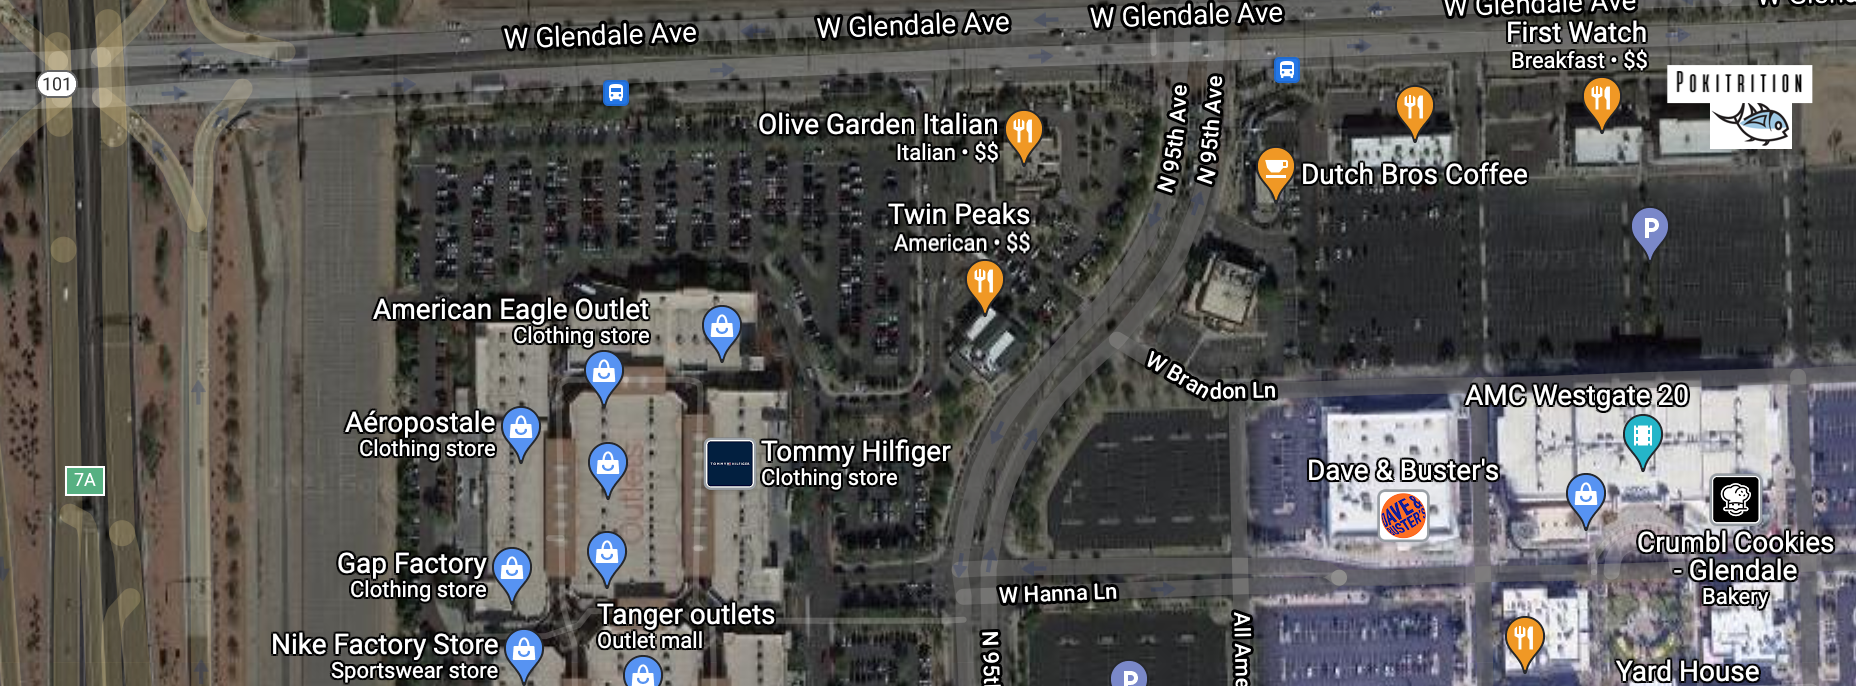 Pokitrition location at Westgate in Map. Near First Watch and Dutch Bros Coffee